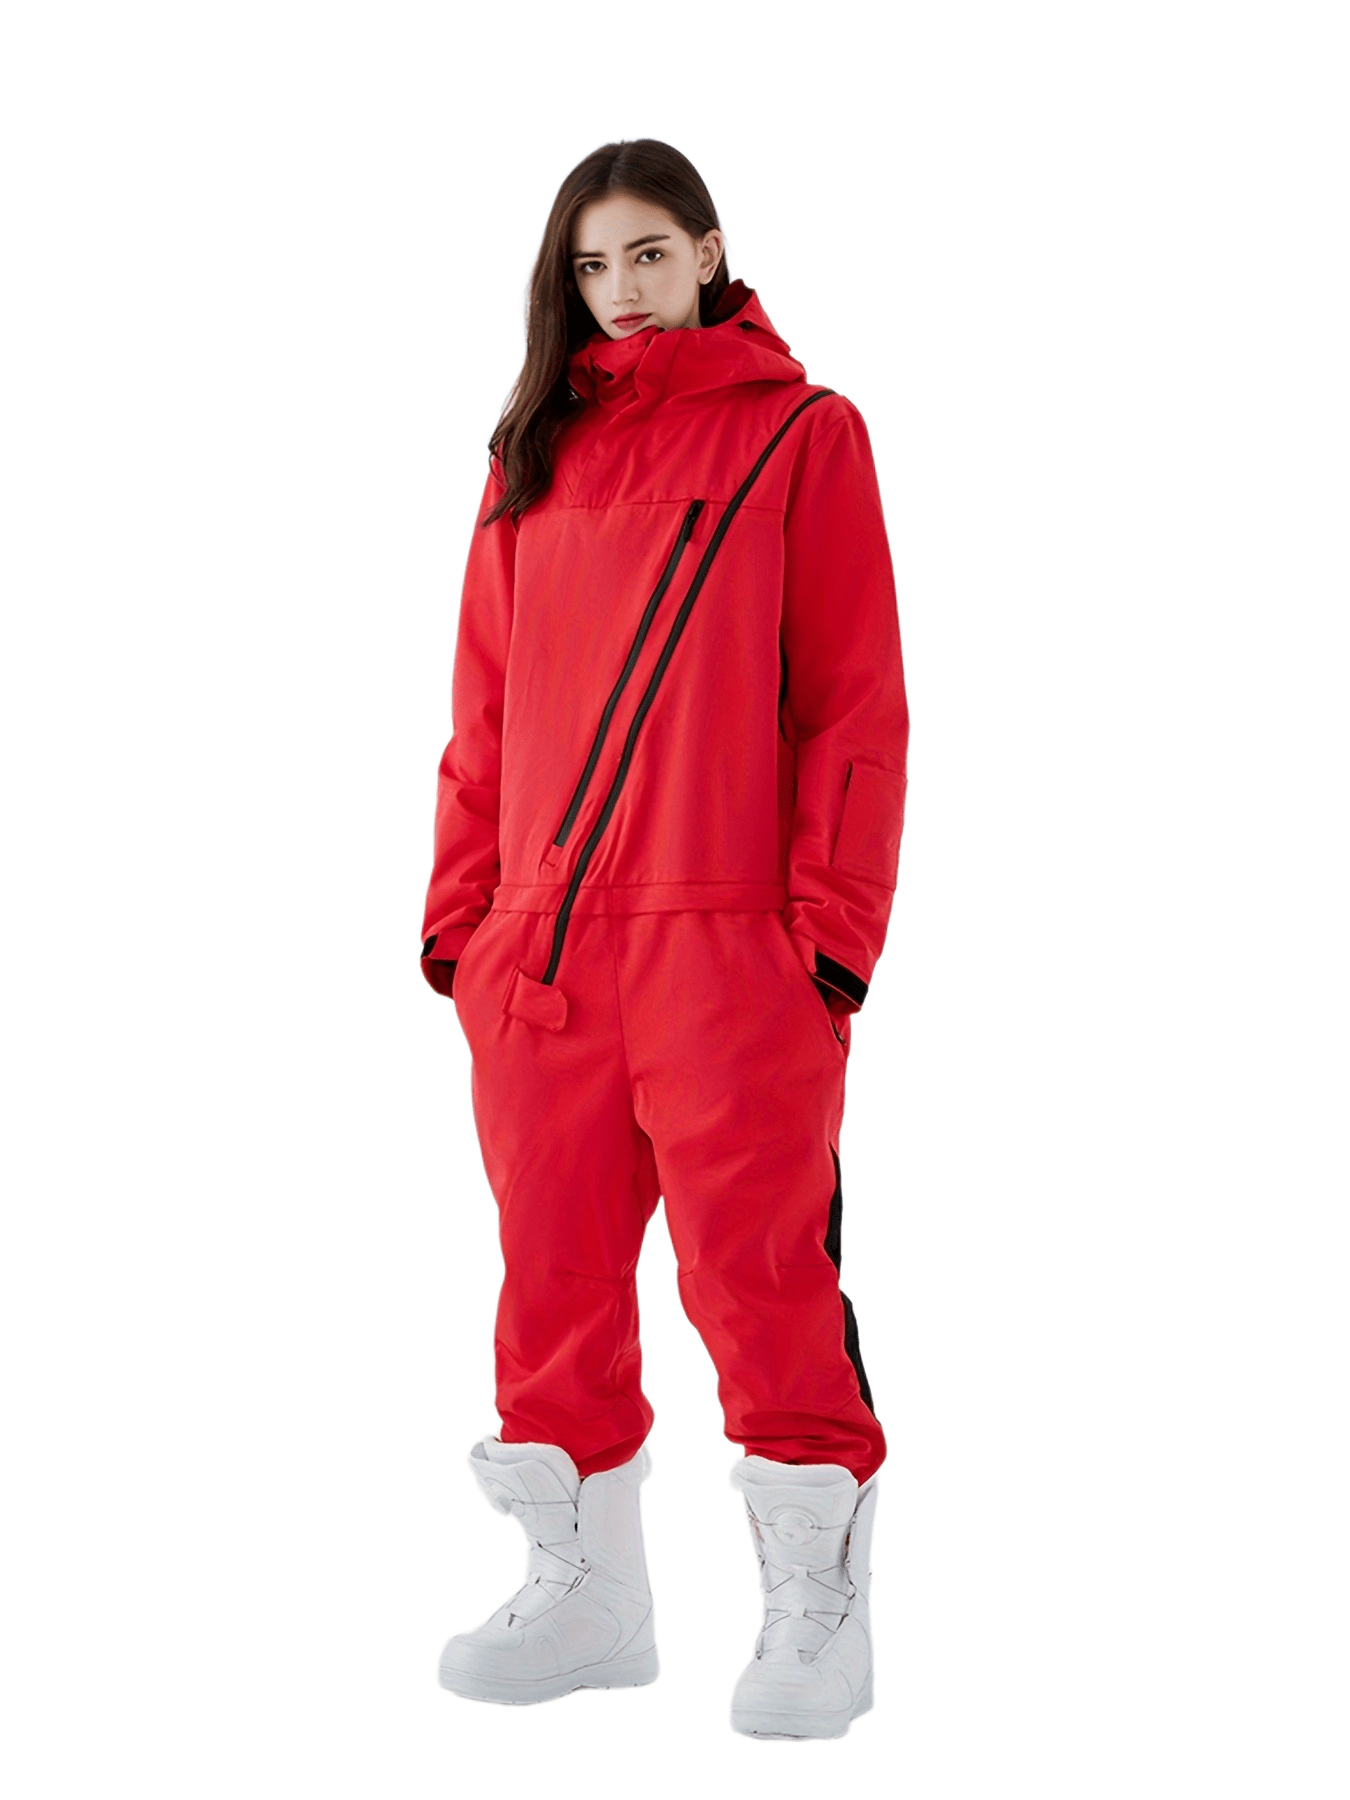 Waterproof Snow Suit for Women, Outdoor Sports Wear, Skiing Costume,  Windproof Snowboarding Sets, Jackets and Bibs, Strap Pants